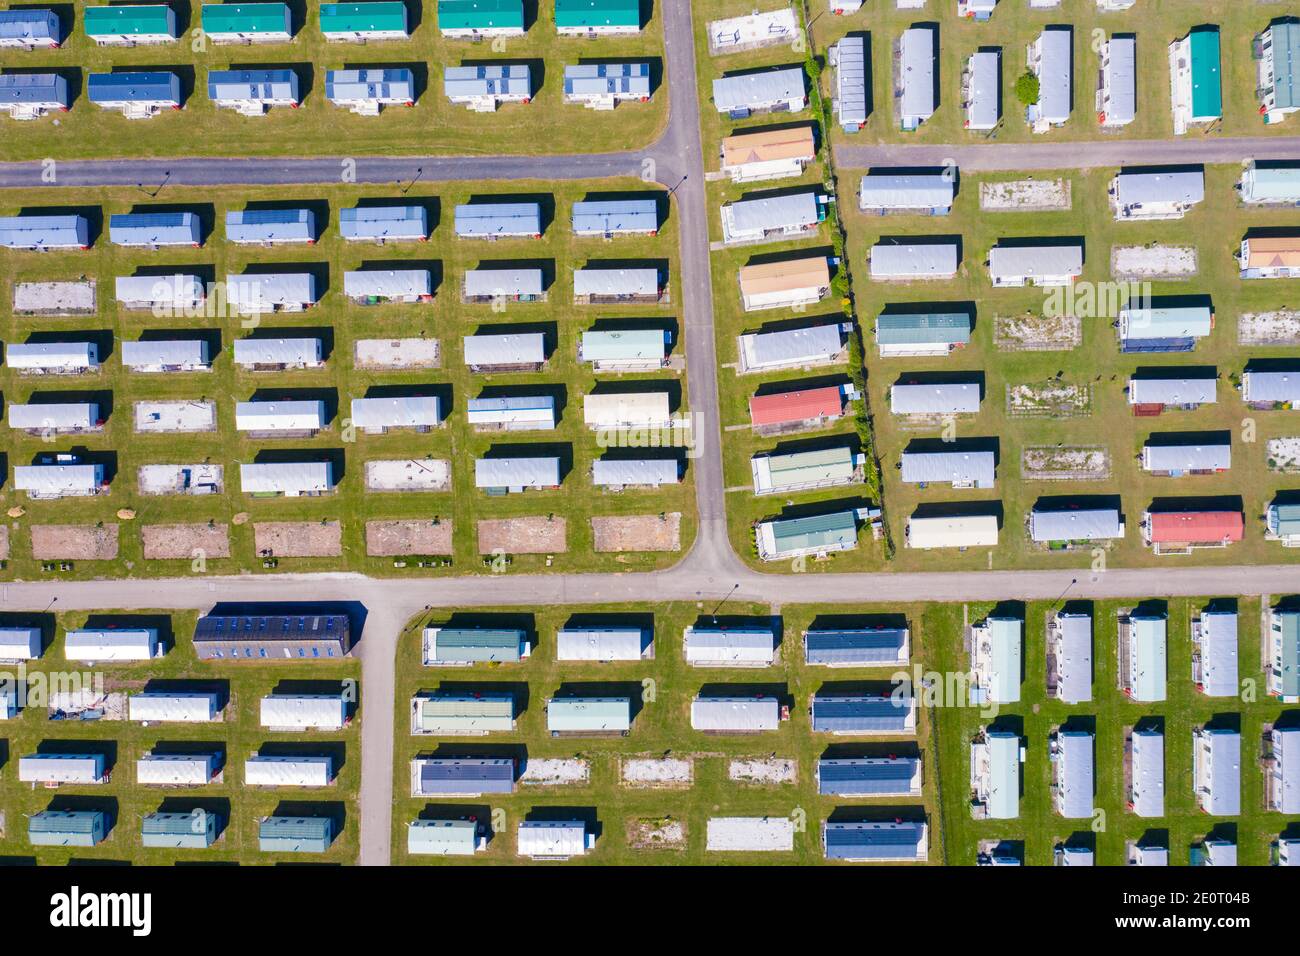 Aerial photo showing a top down view of caravans and the caravan camping resort site located in the British village of Skegness in Ingoldmells East Yo Stock Photo